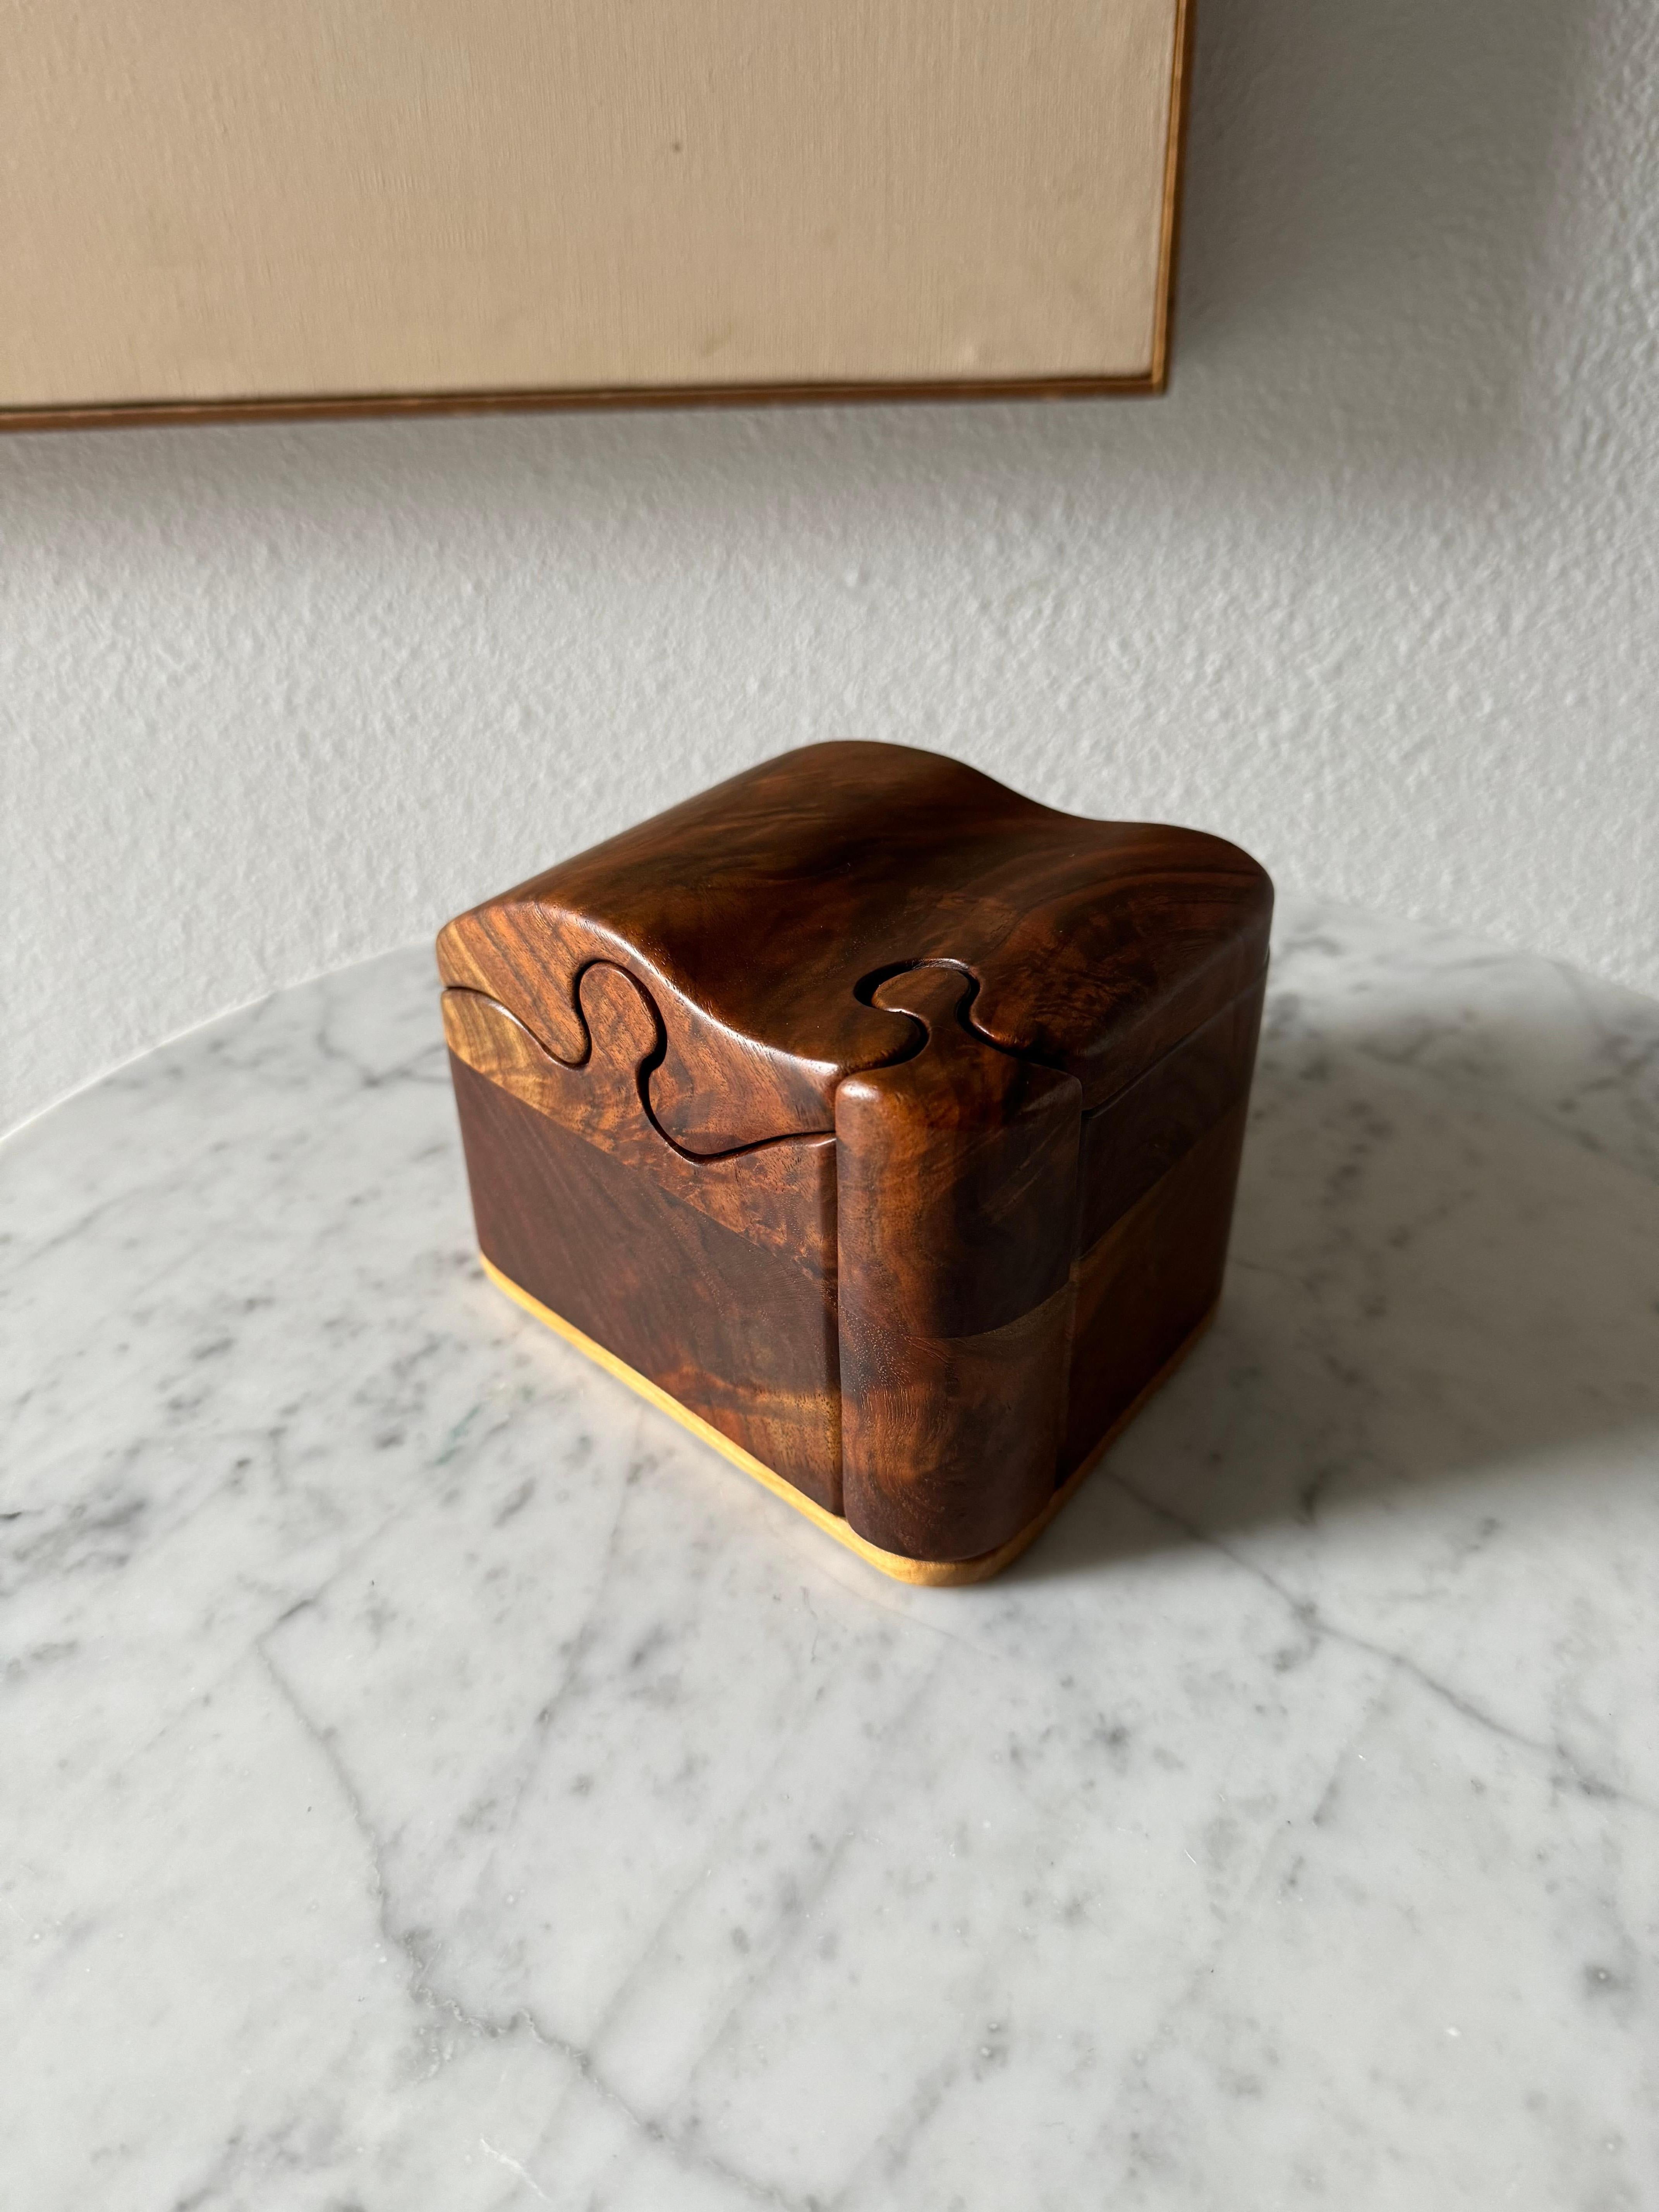 Fred & Marilyn Buss Trinket Puzzle Box, 1970s 
Made of black walnut and maple , comes with original paperwork . 